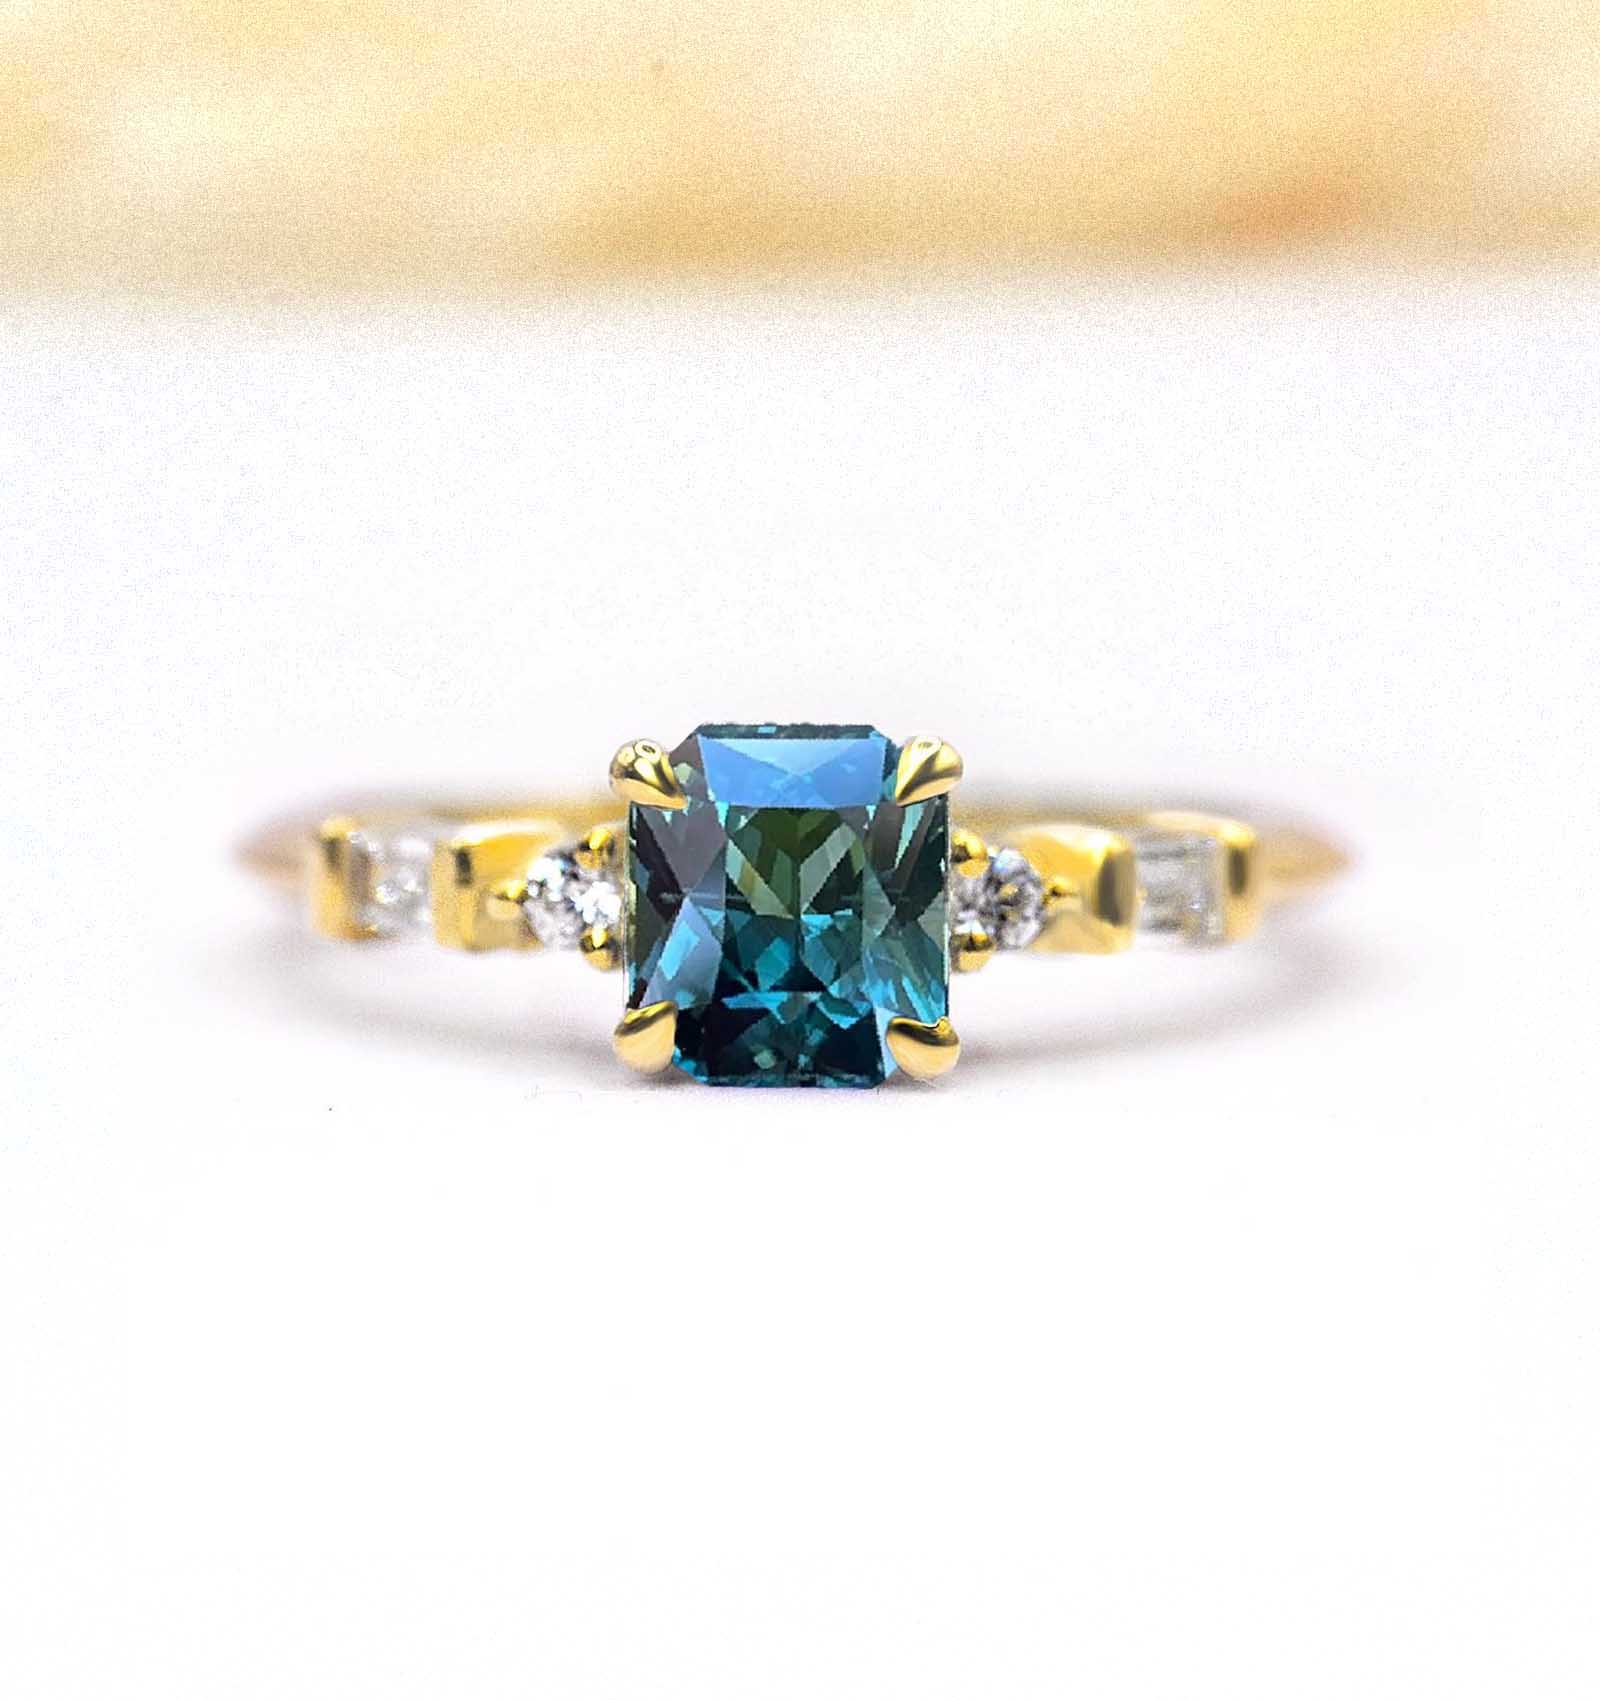 6mm radiant teal sapphire engagement ring